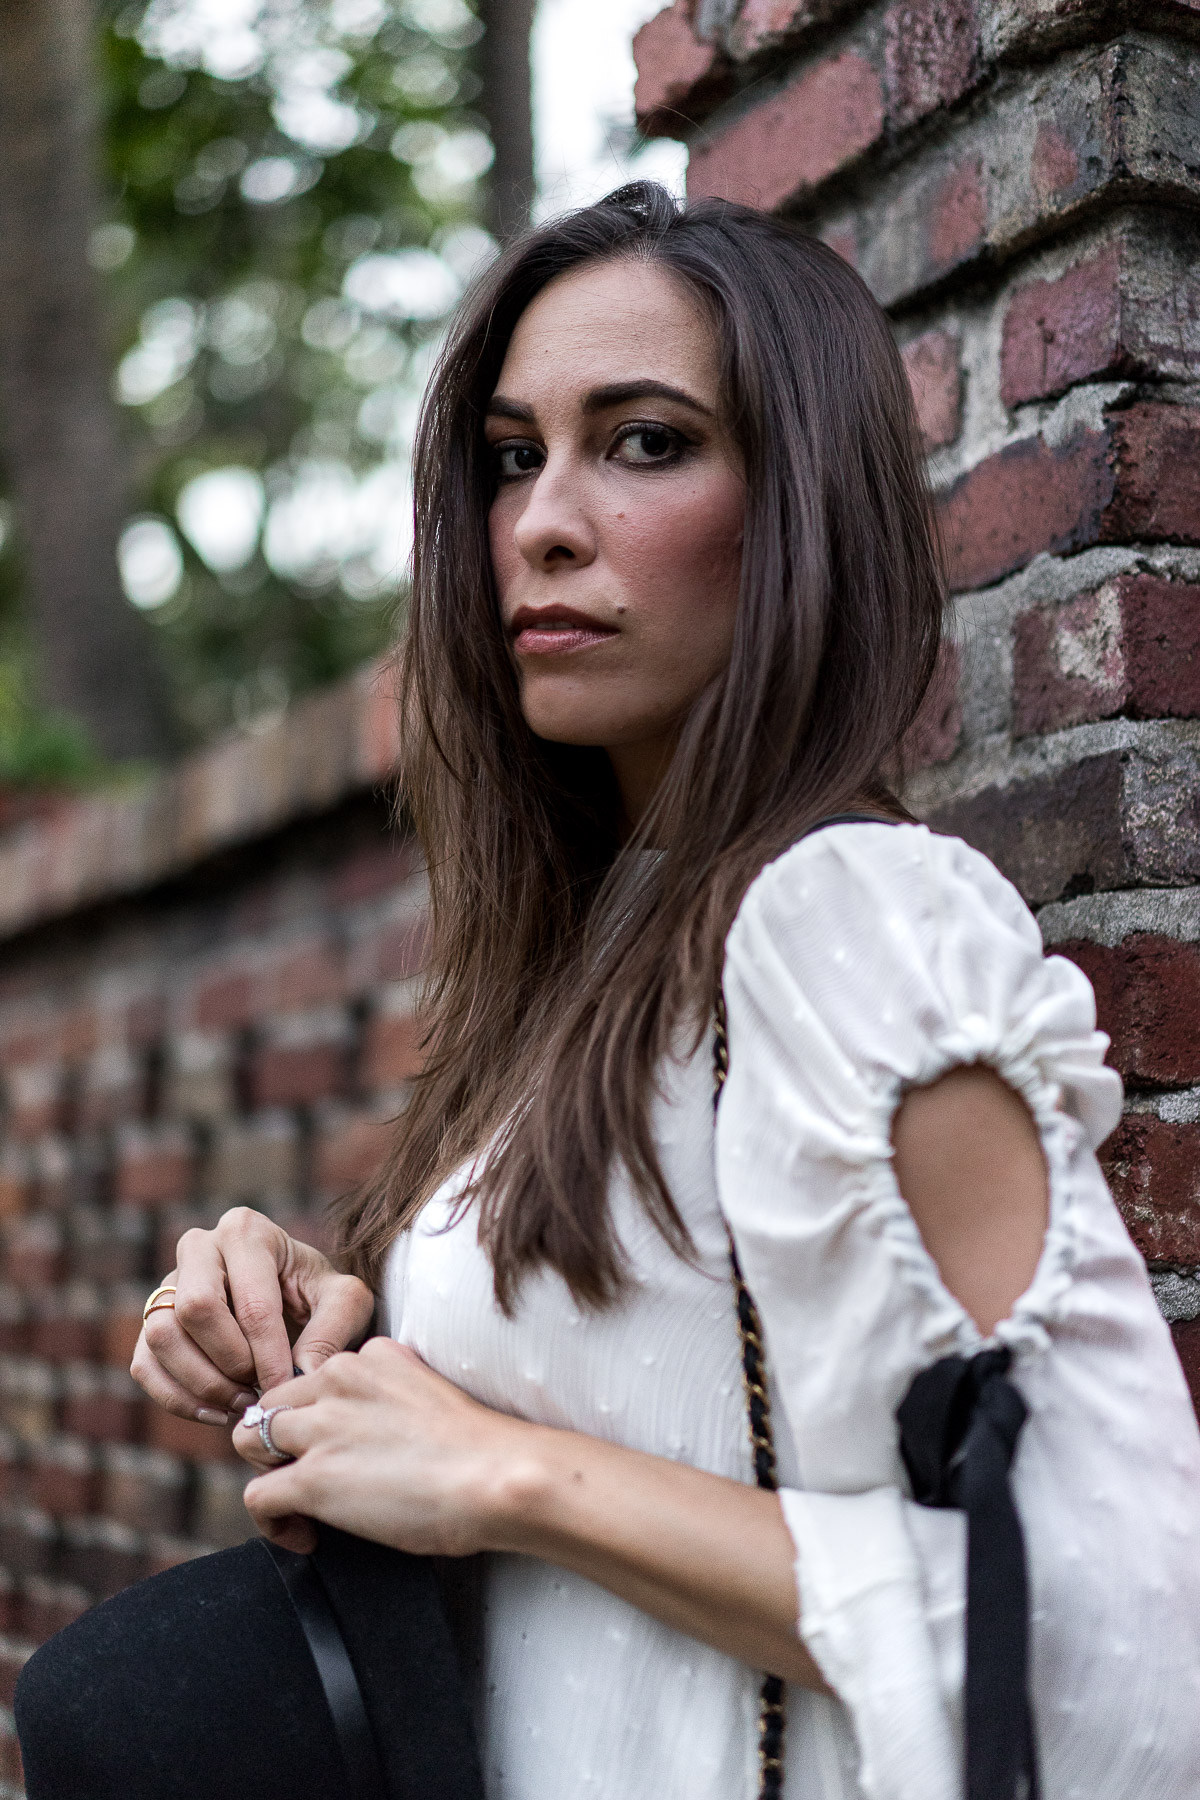 Amanda from A Glam Lifestyle blog wears Club Monaco bell sleeve top called Priyalla top with black ribbon tie sash